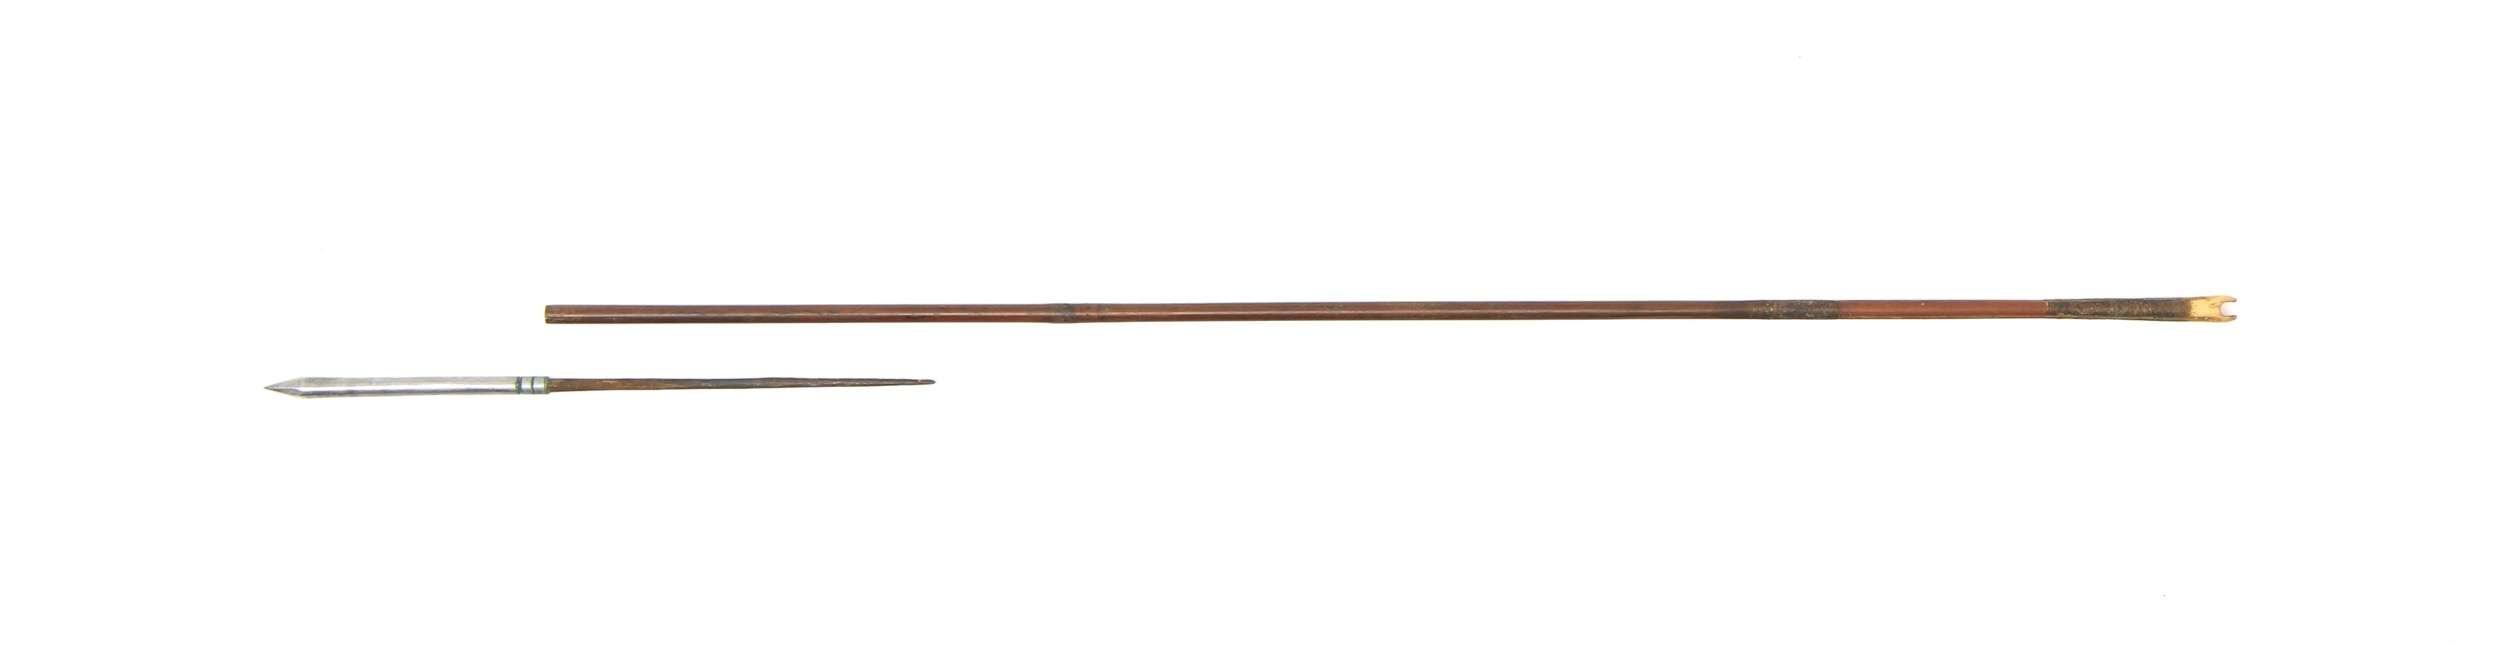 Heavy Indian counter-siege arrows